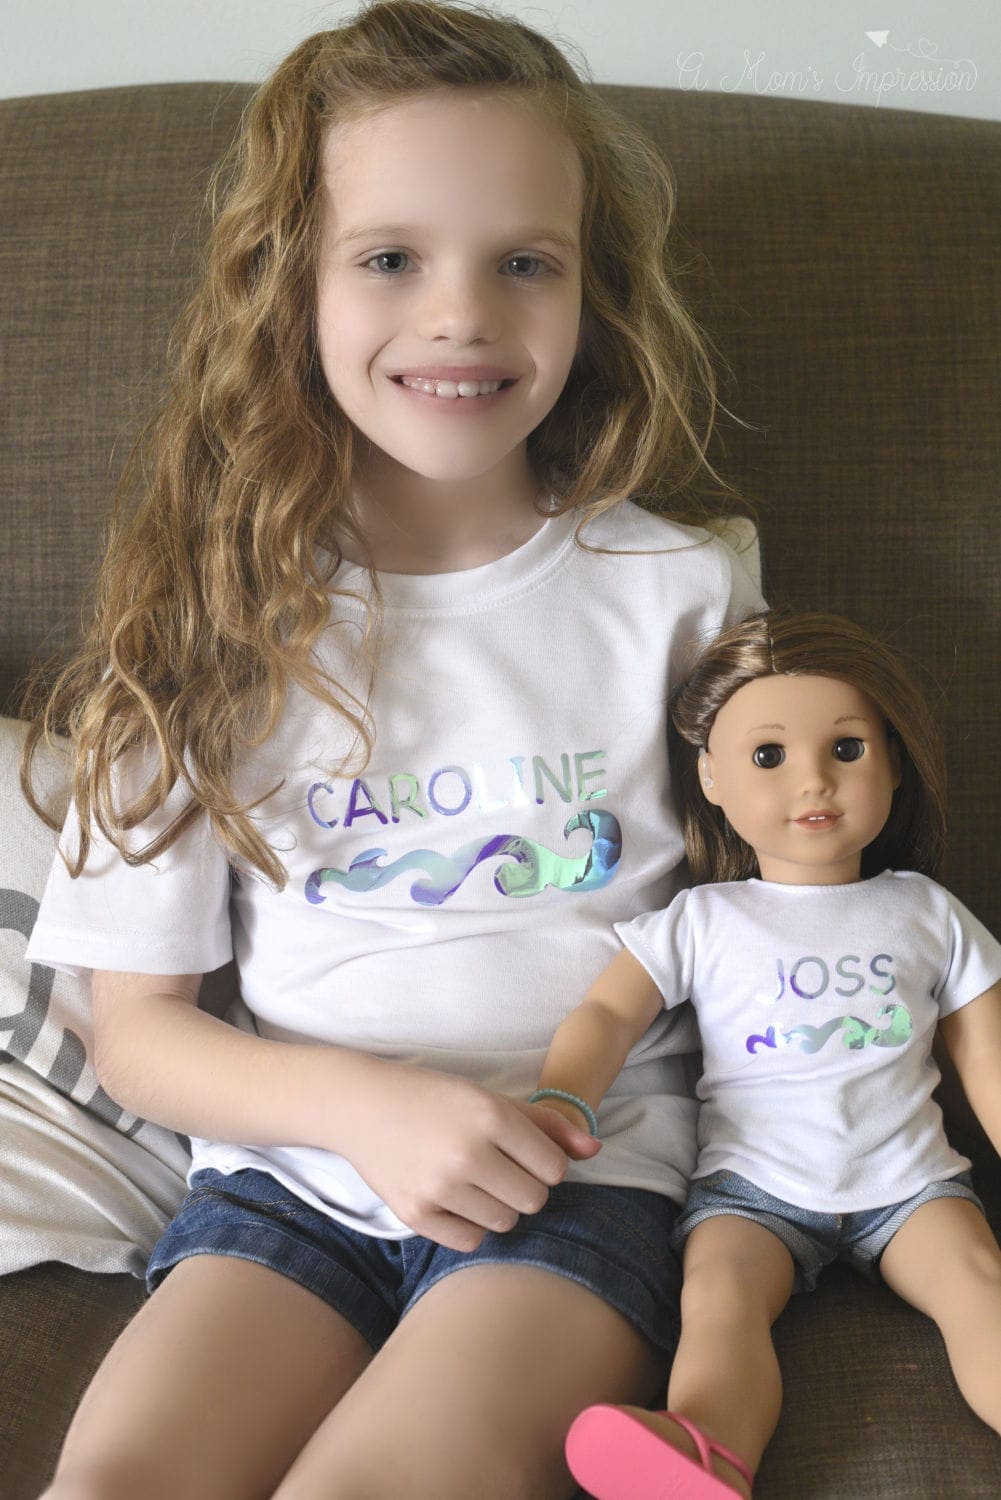 a girl wearing matching shirts with her doll, Joss